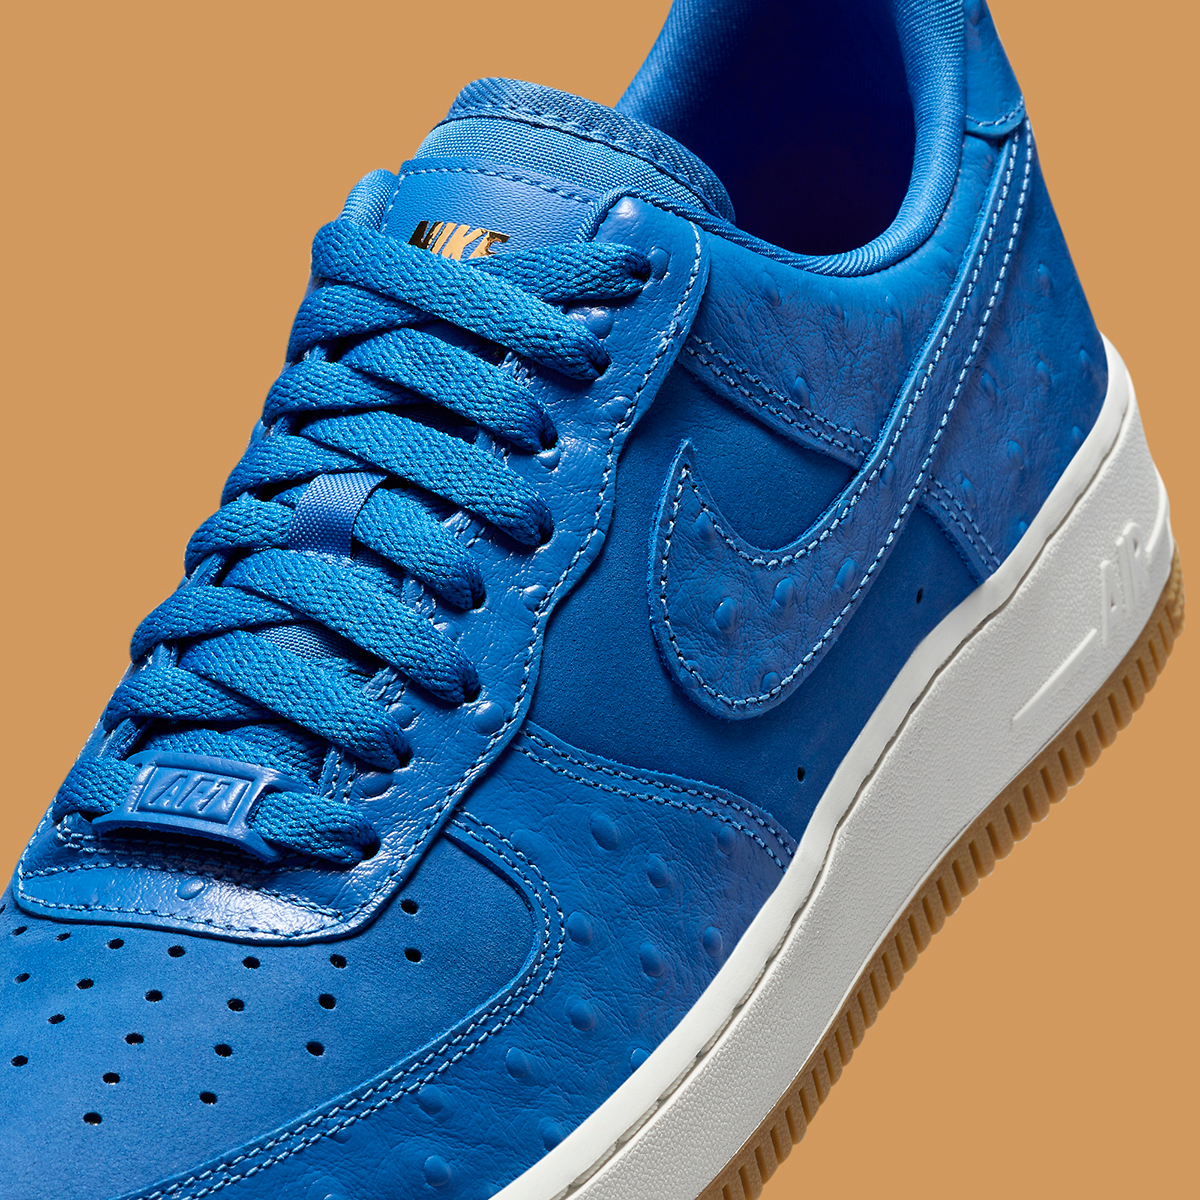 the legendary Nike Les SB joins forces with John Vitales Low Blue Ostrich Dz2708 400 5